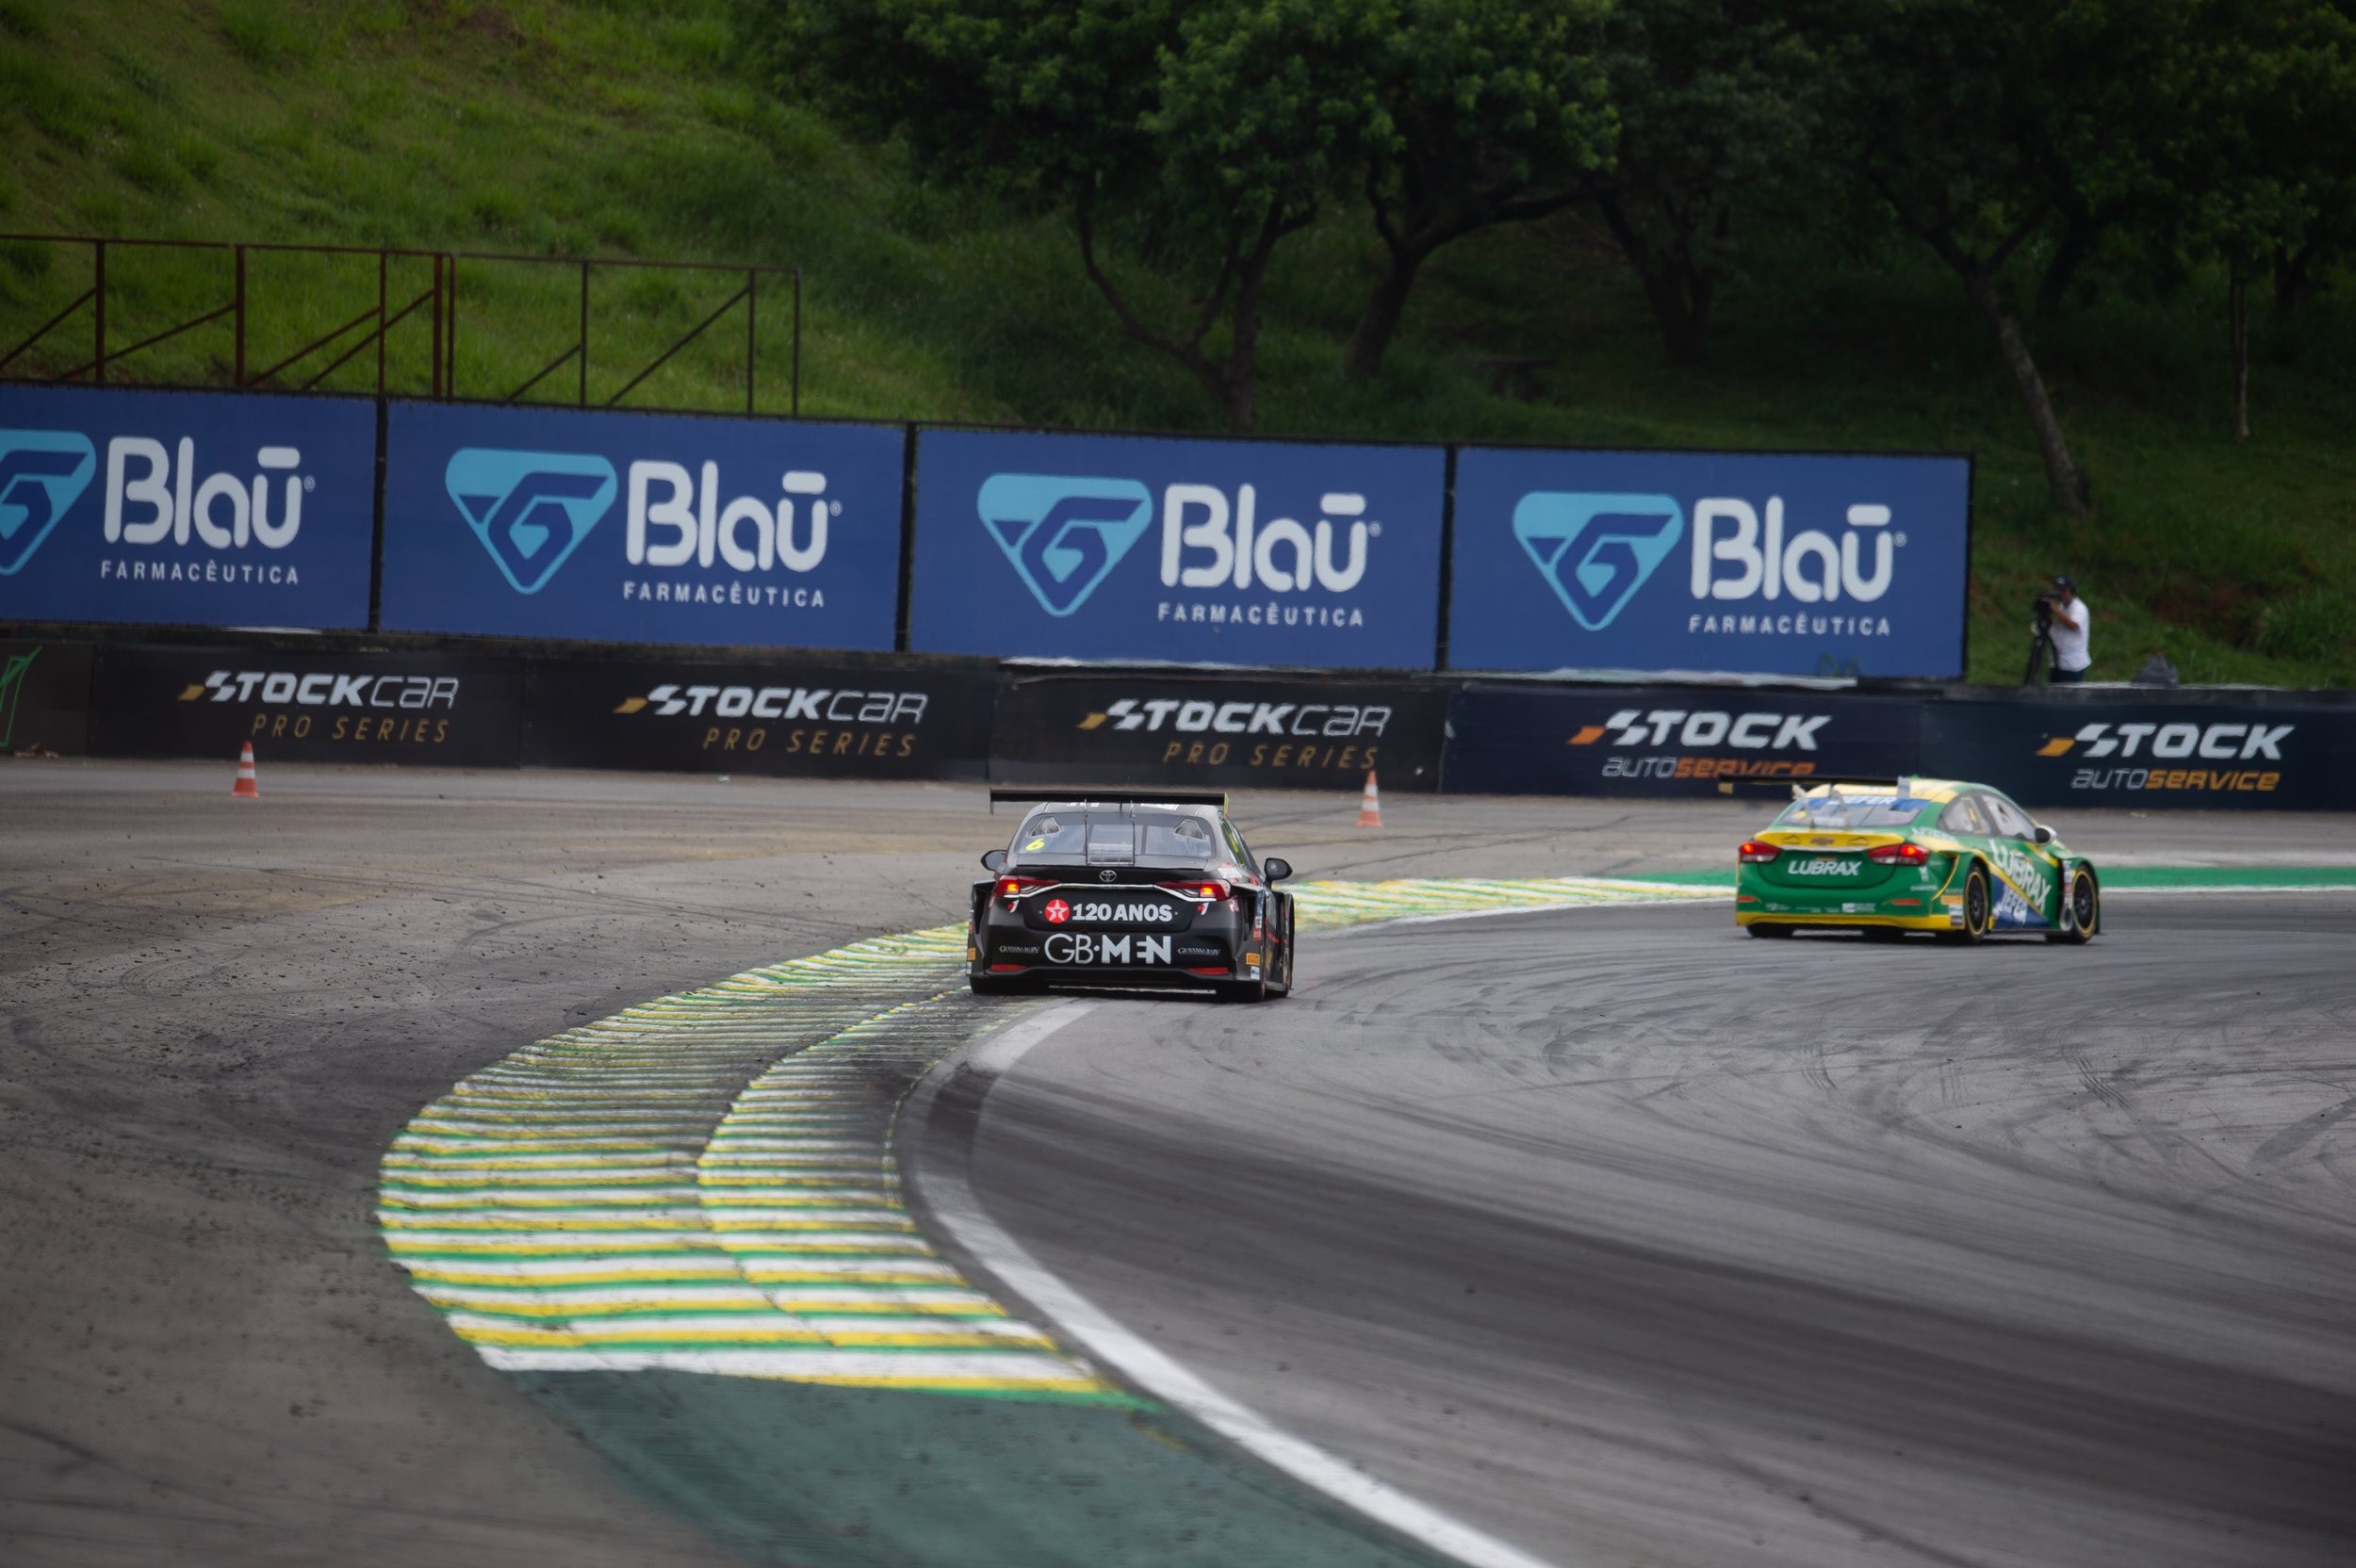 Brazil's Stock Car Pro Series Cars Coming to iRacing in 2022 - BoxThisLap